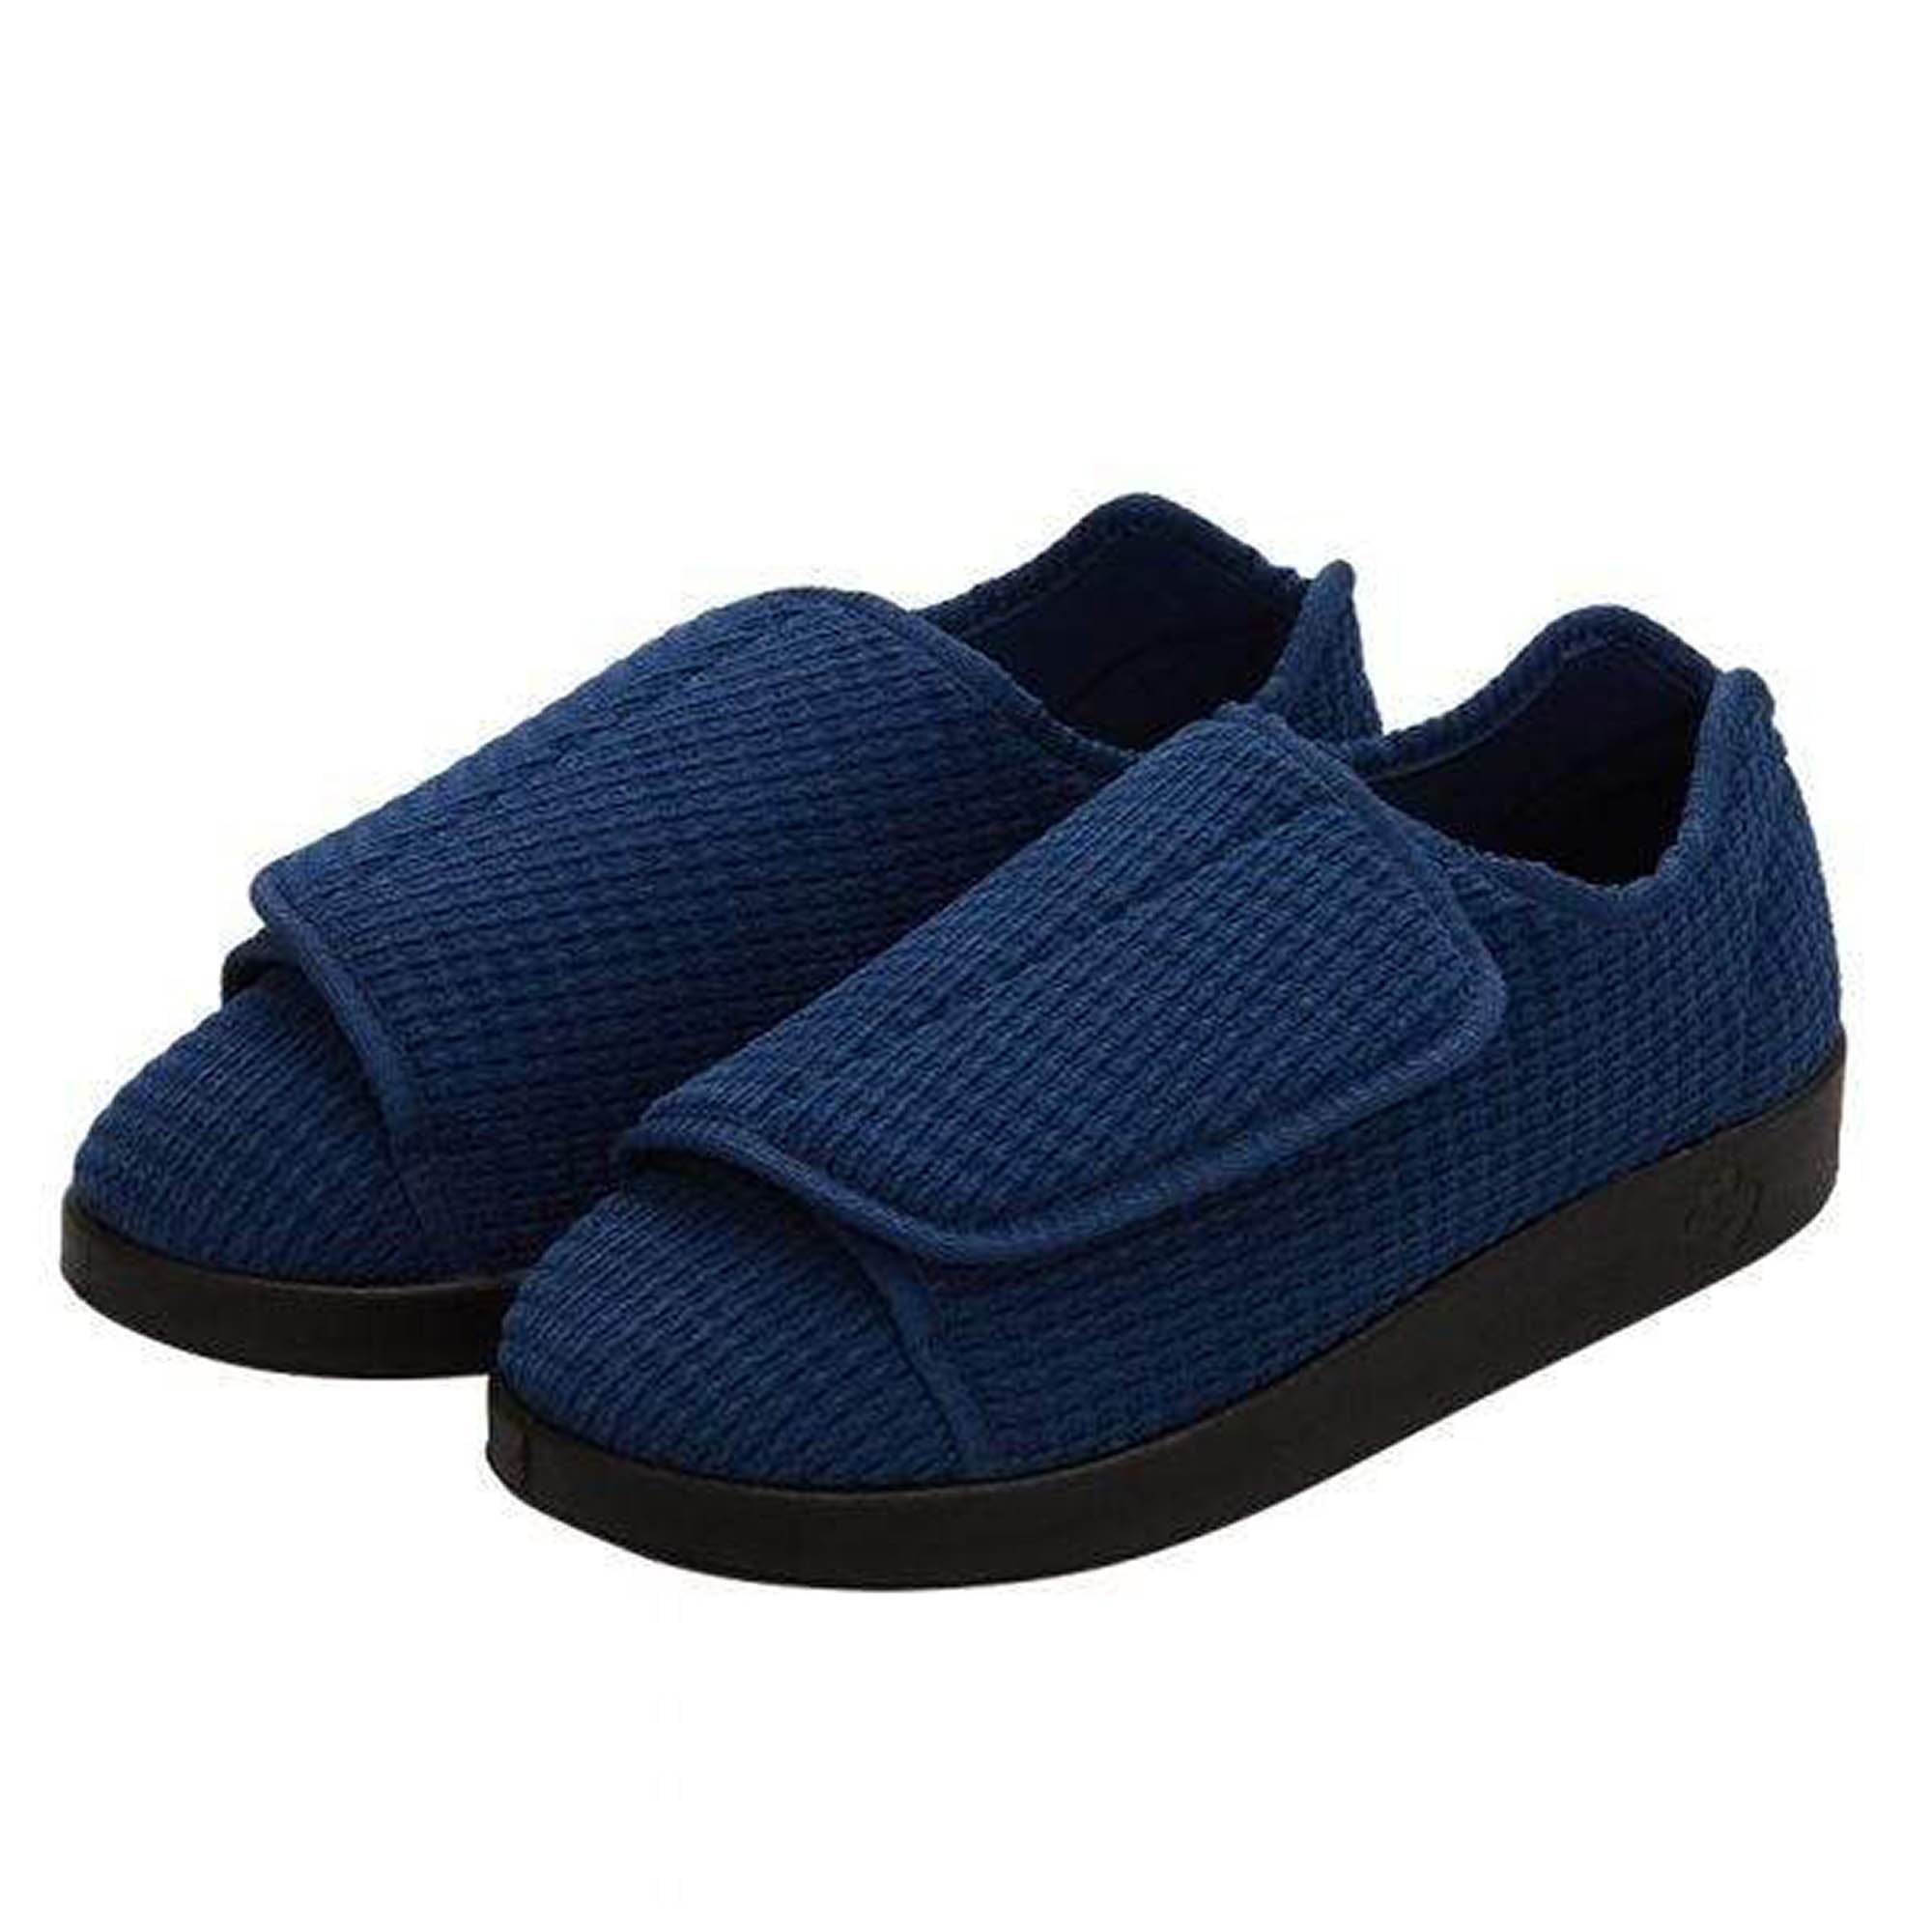 Silverts Men's Extra Extra Wide Slip-Resistant Slippers - Steel - 8